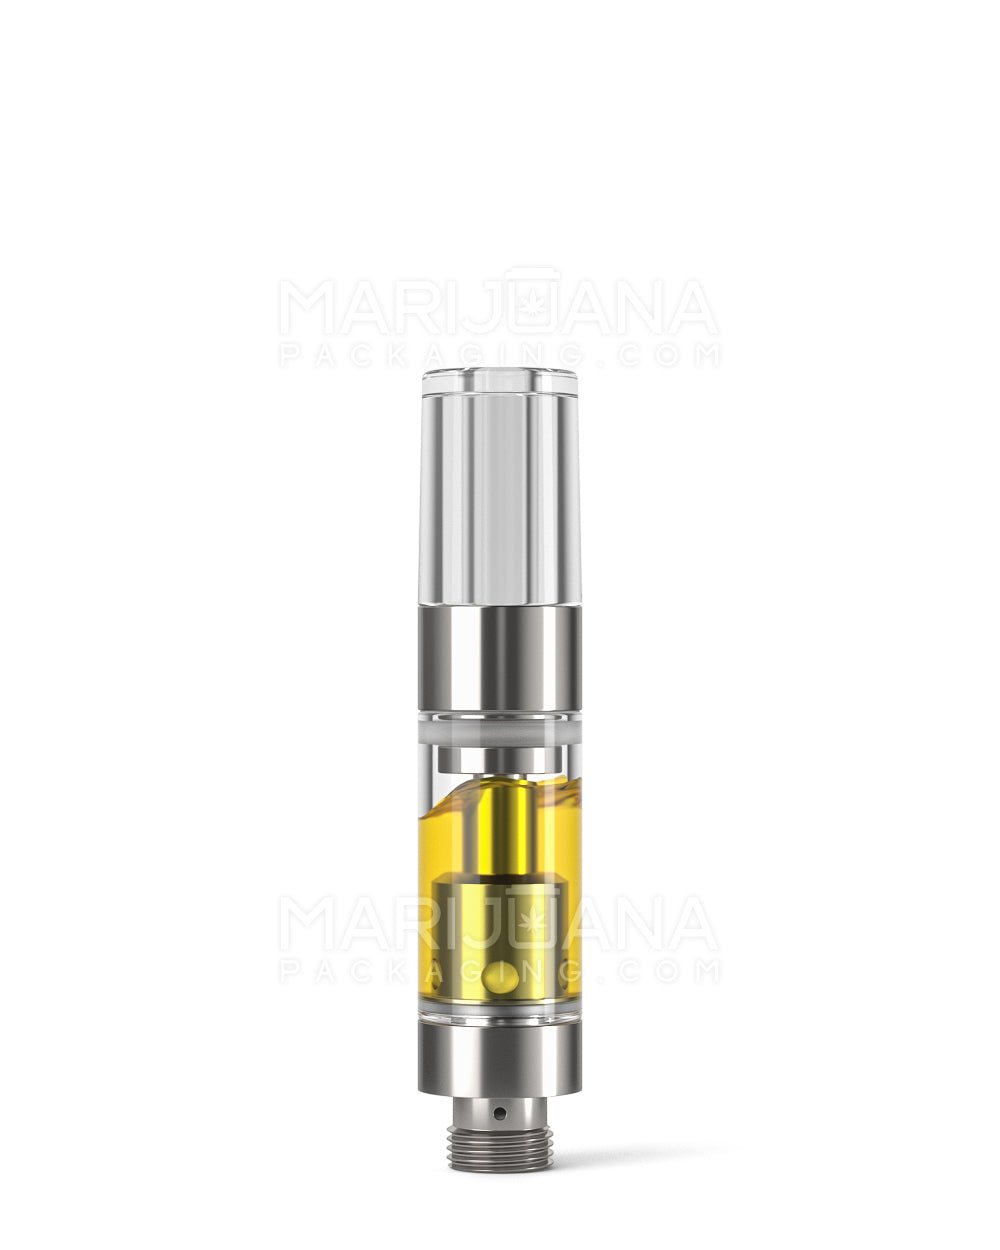 Ceramic Core Glass Vape Cartridge with Round Clear Plastic Mouthpiece | 0.5mL - Press On - 1200 Count - 2